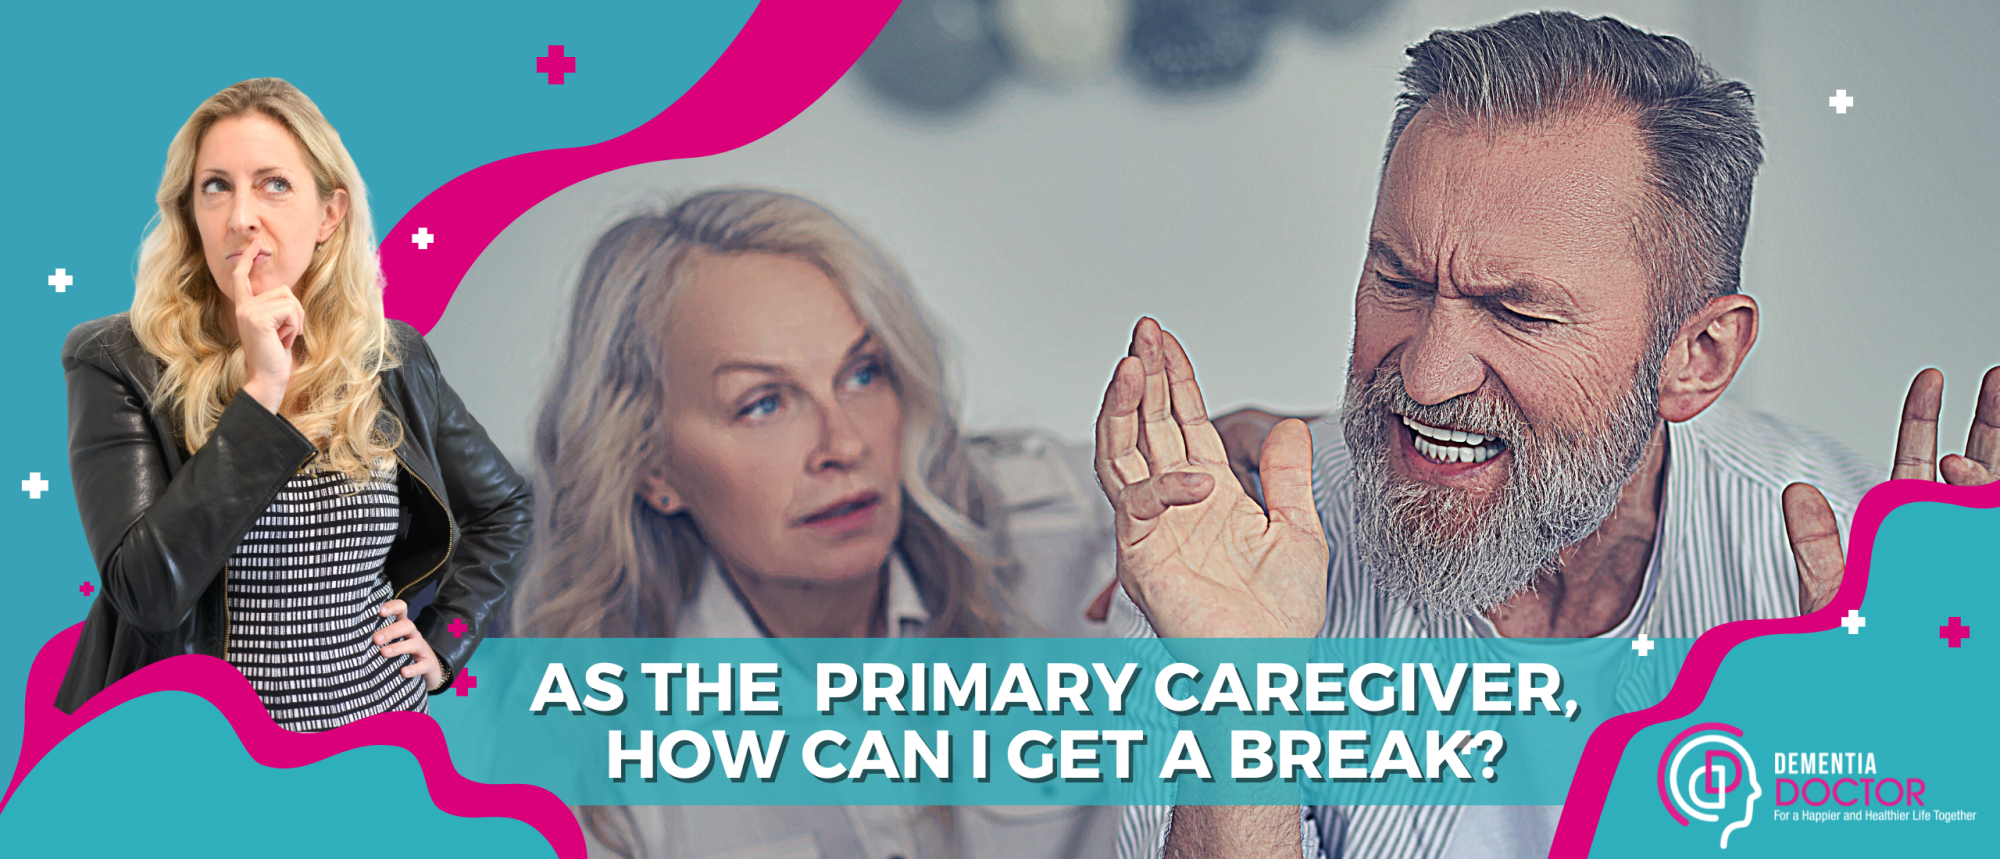 Blog As the primary caregiver for a dementia patient, how can I get a break?